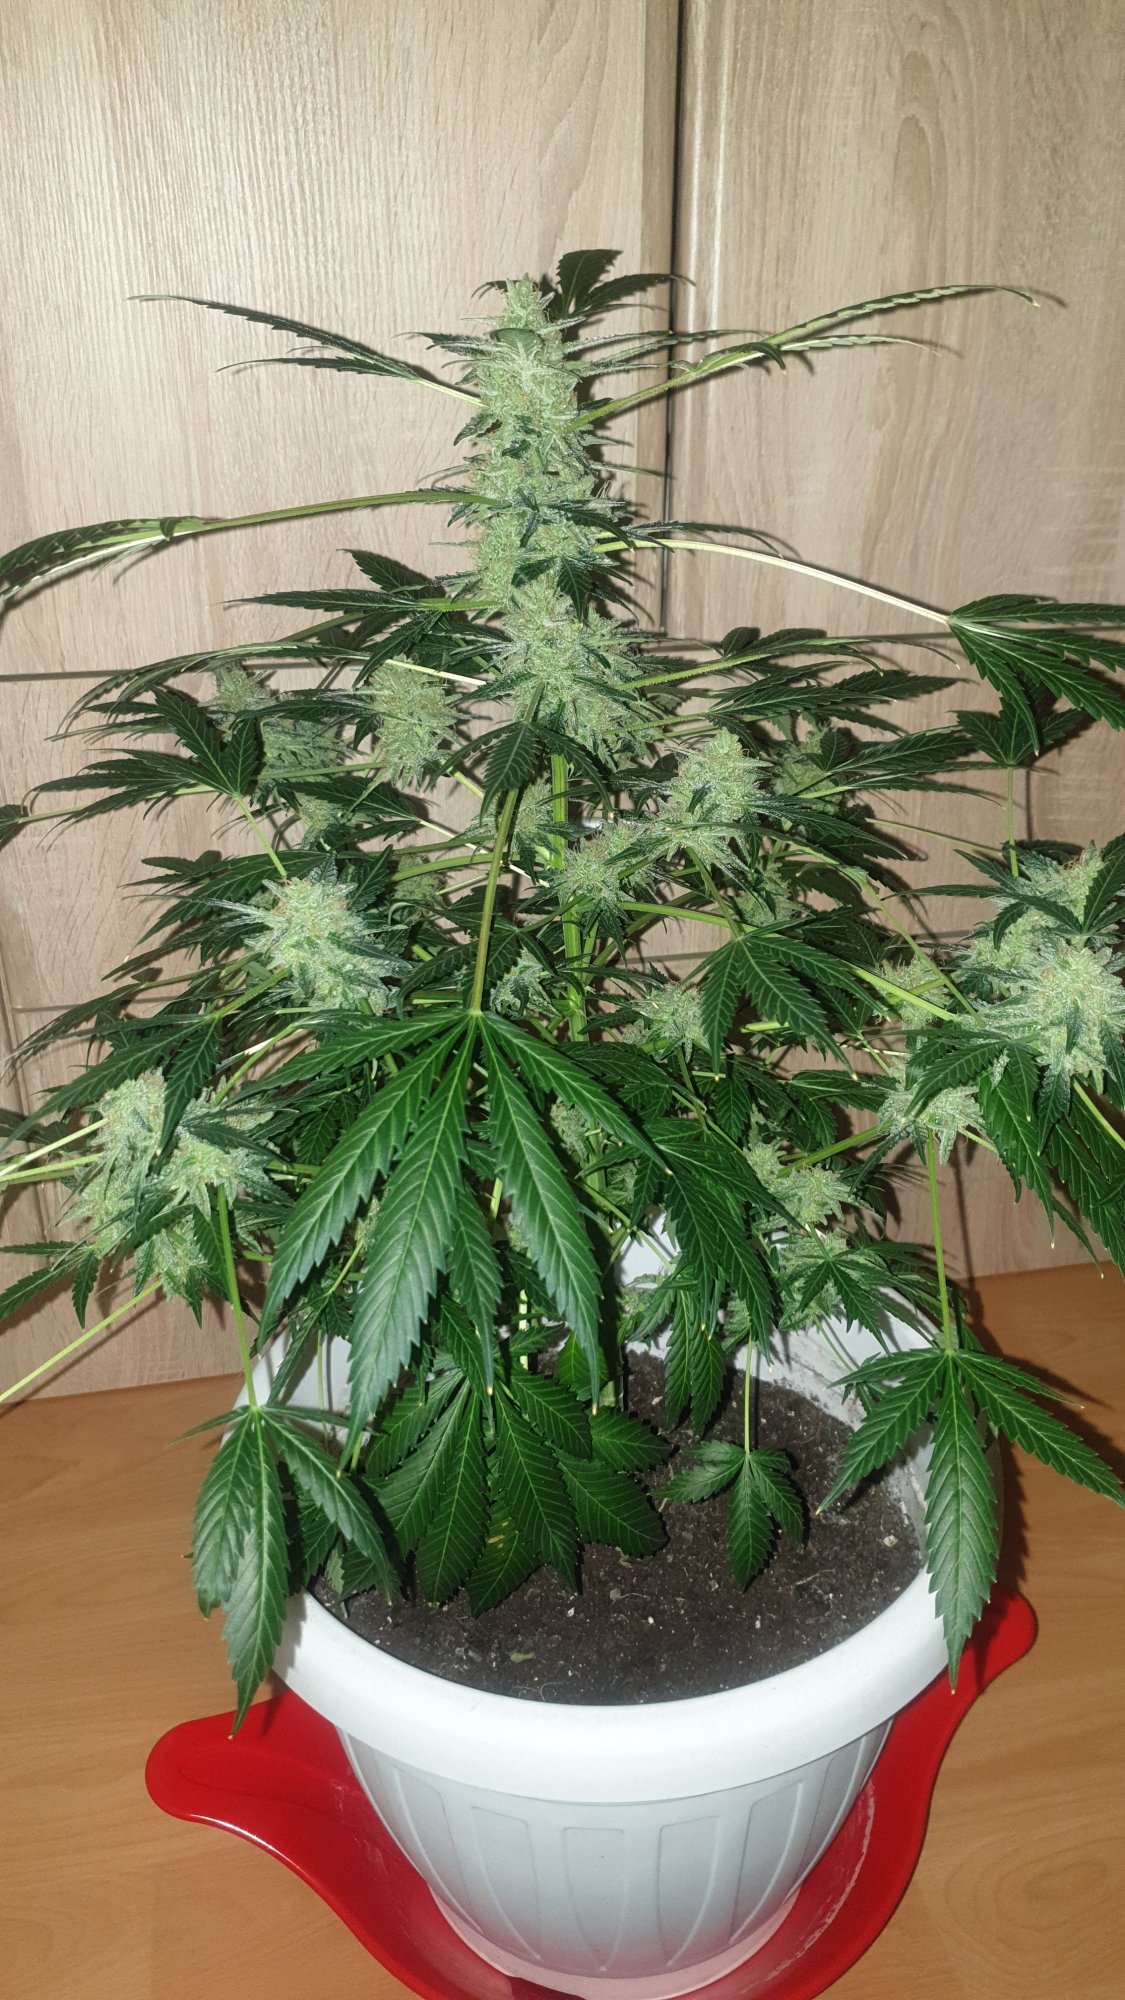 Can i harvest need help 8